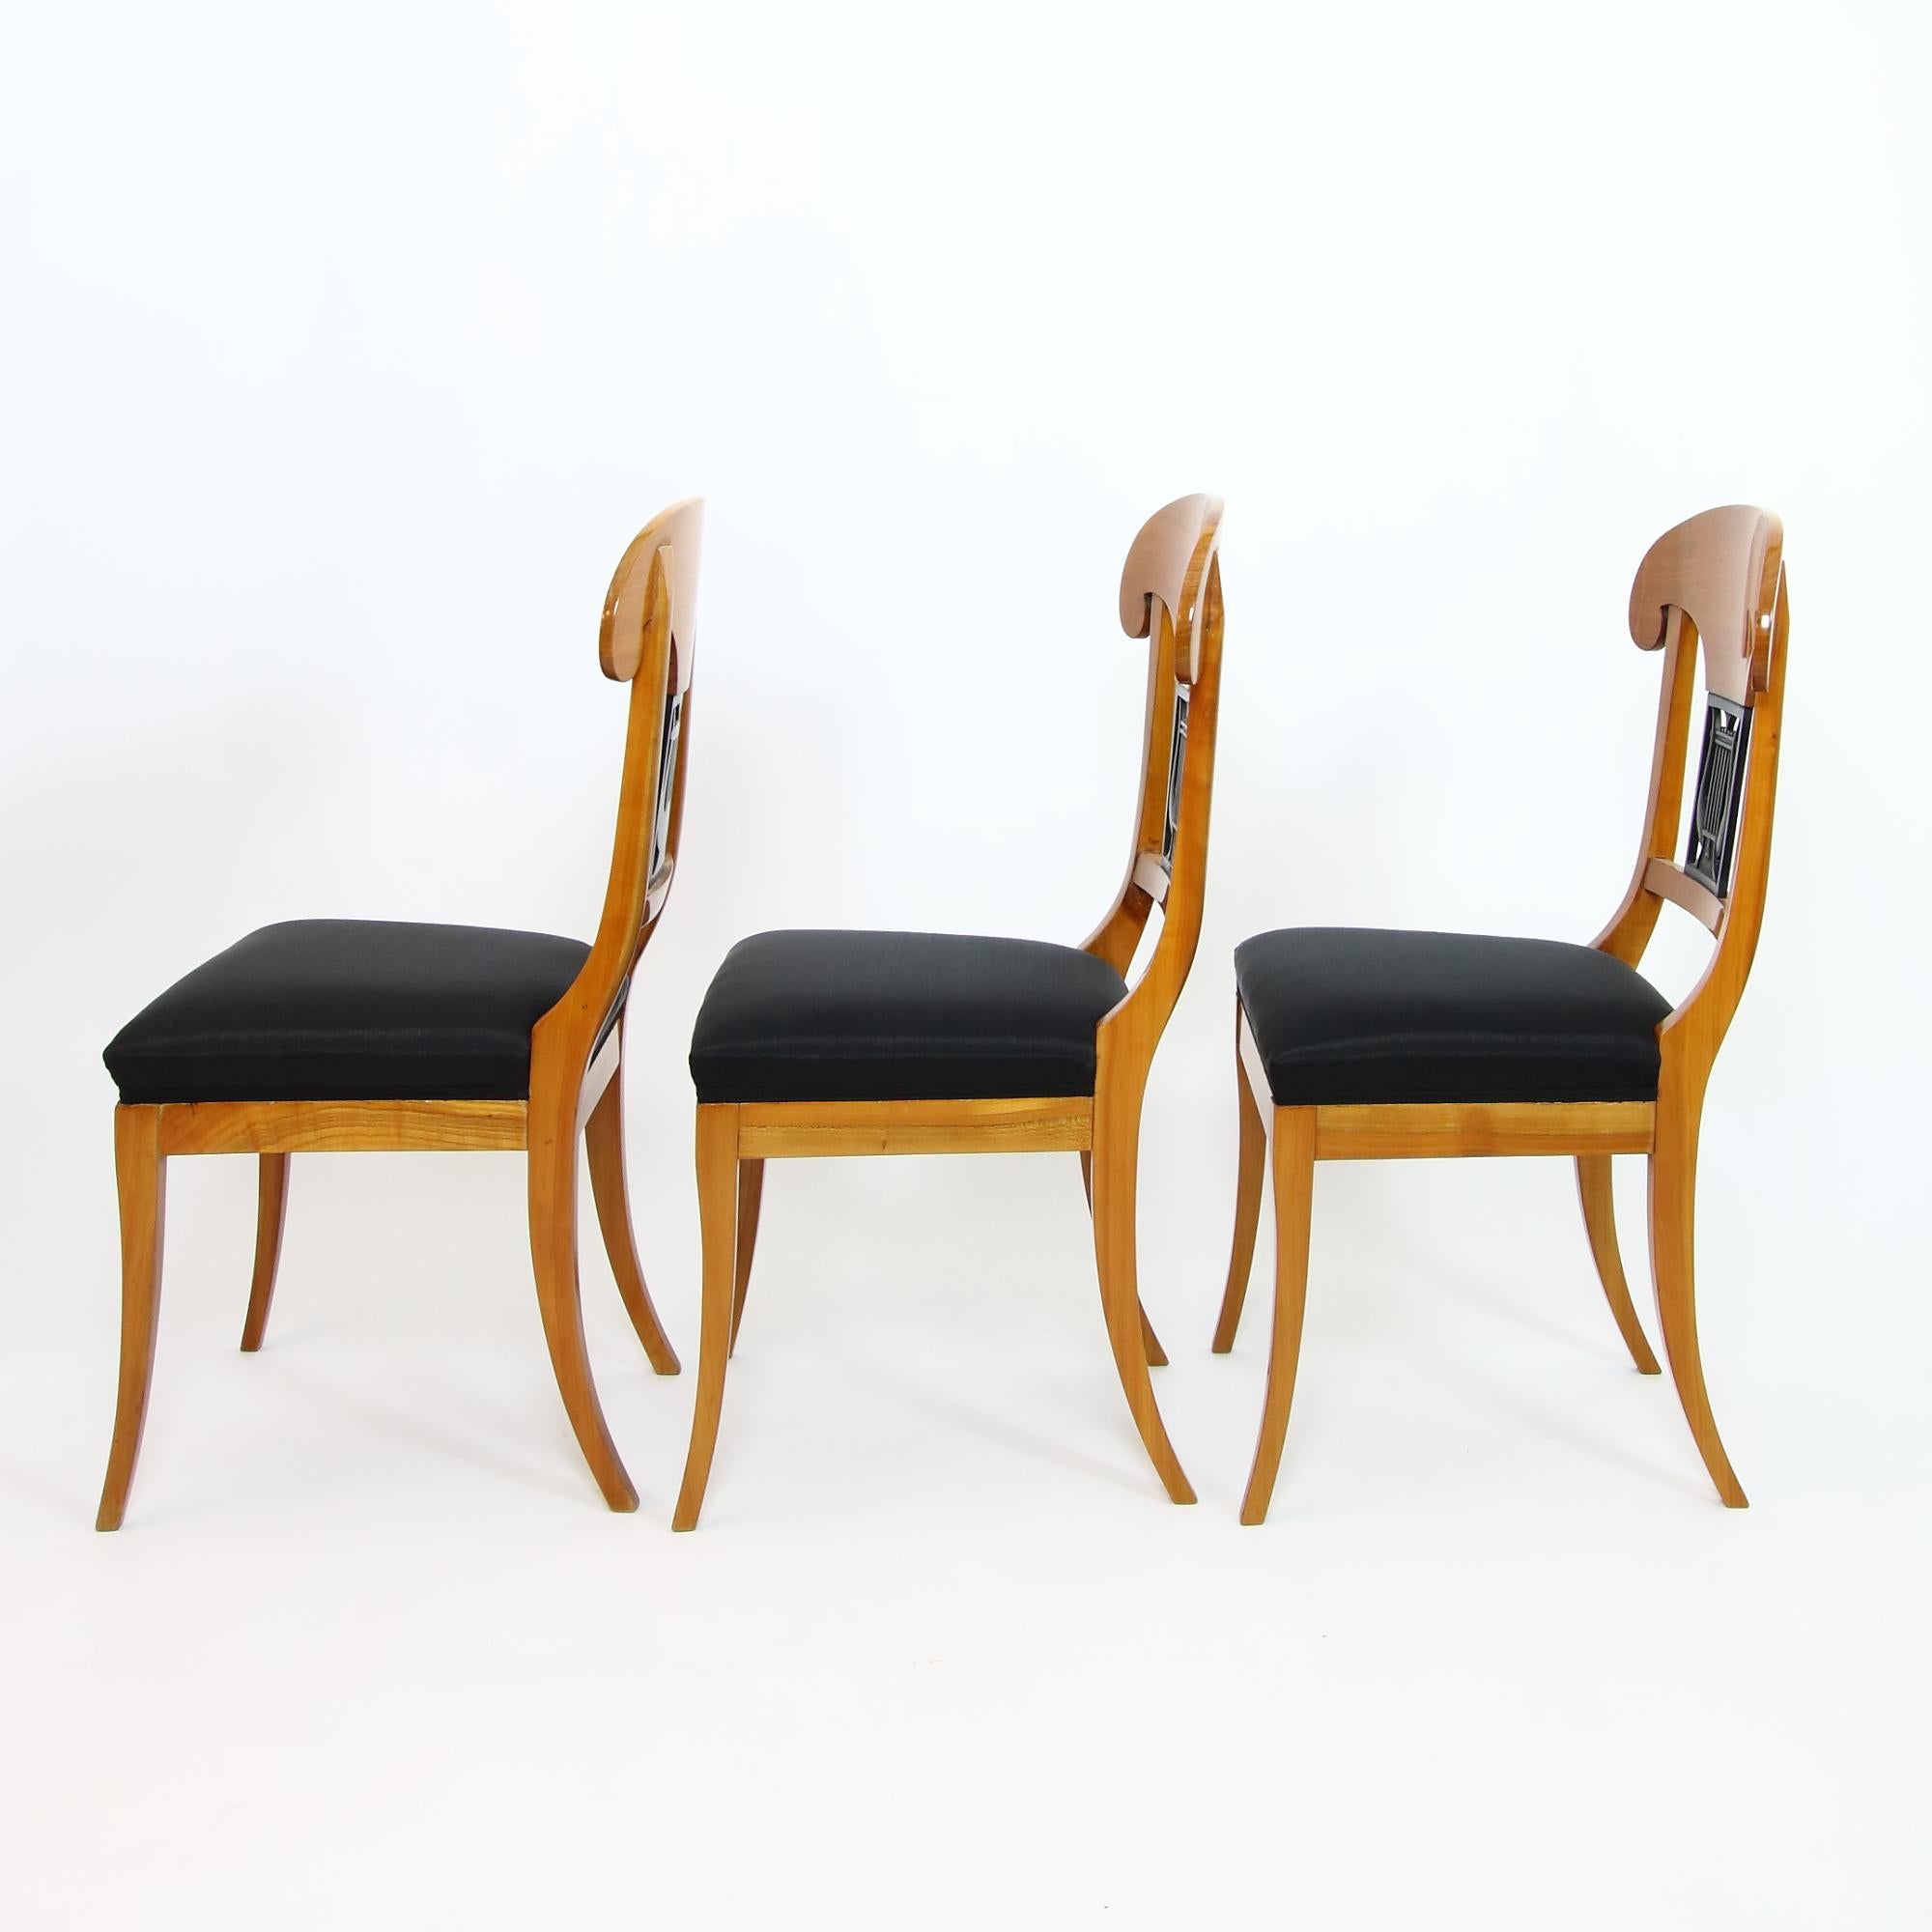 19th Century Set of 8 Partially Early 19th German Biedermeier Saxe-Coburg Provenance Chairs For Sale